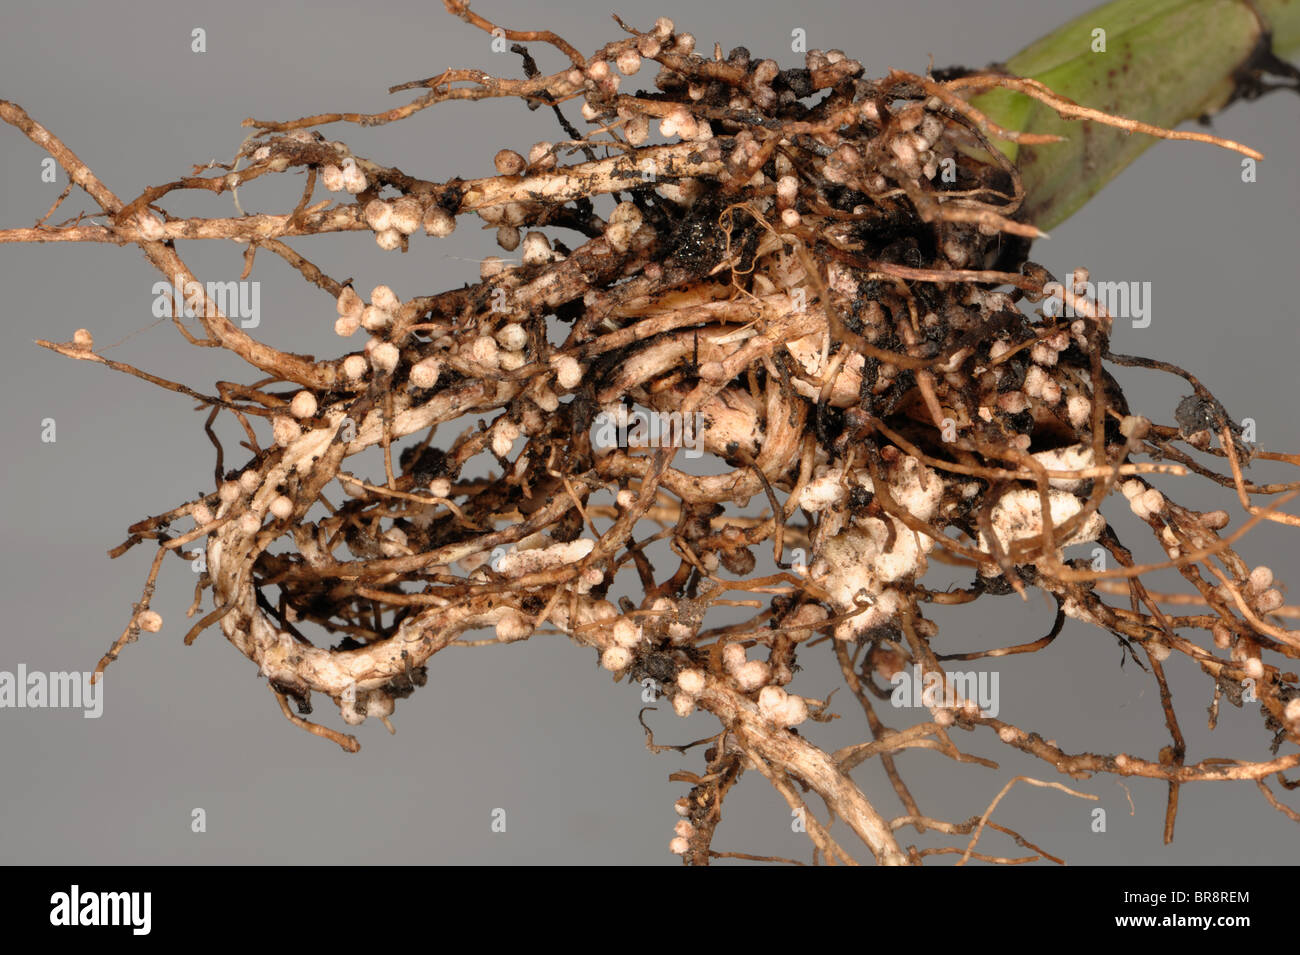 Rhizobium root nodules on the roots of a broad or field bean for nitrogen fixation Stock Photo